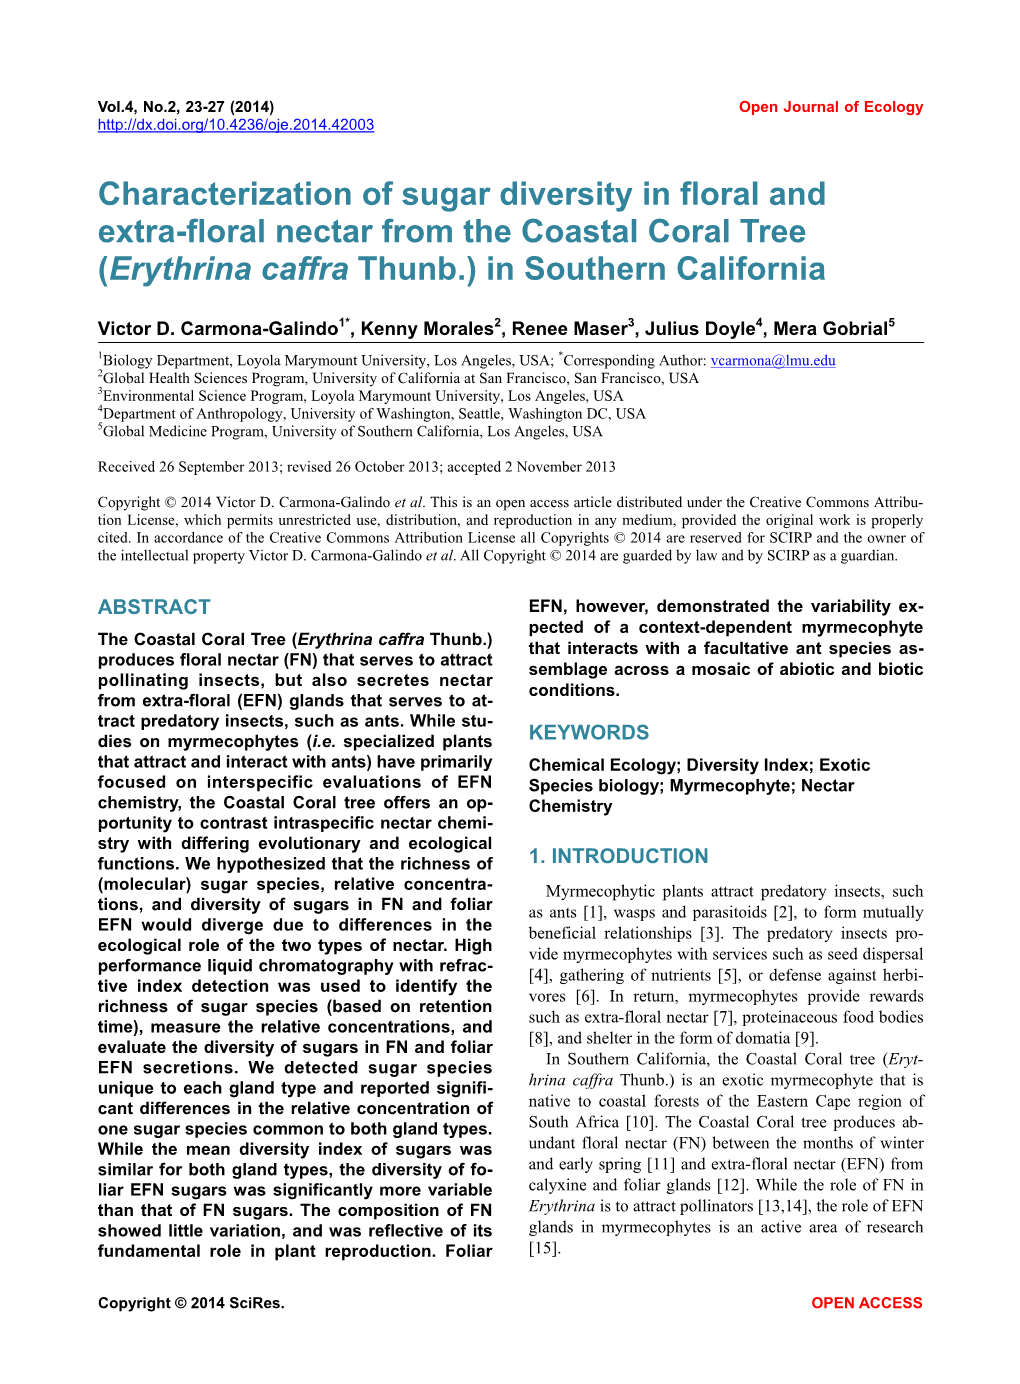 Characterization of Sugar Diversity in Floral and Extra-Floral Nectar from the Coastal Coral Tree (Erythrina Caffra Thunb.) in Southern California